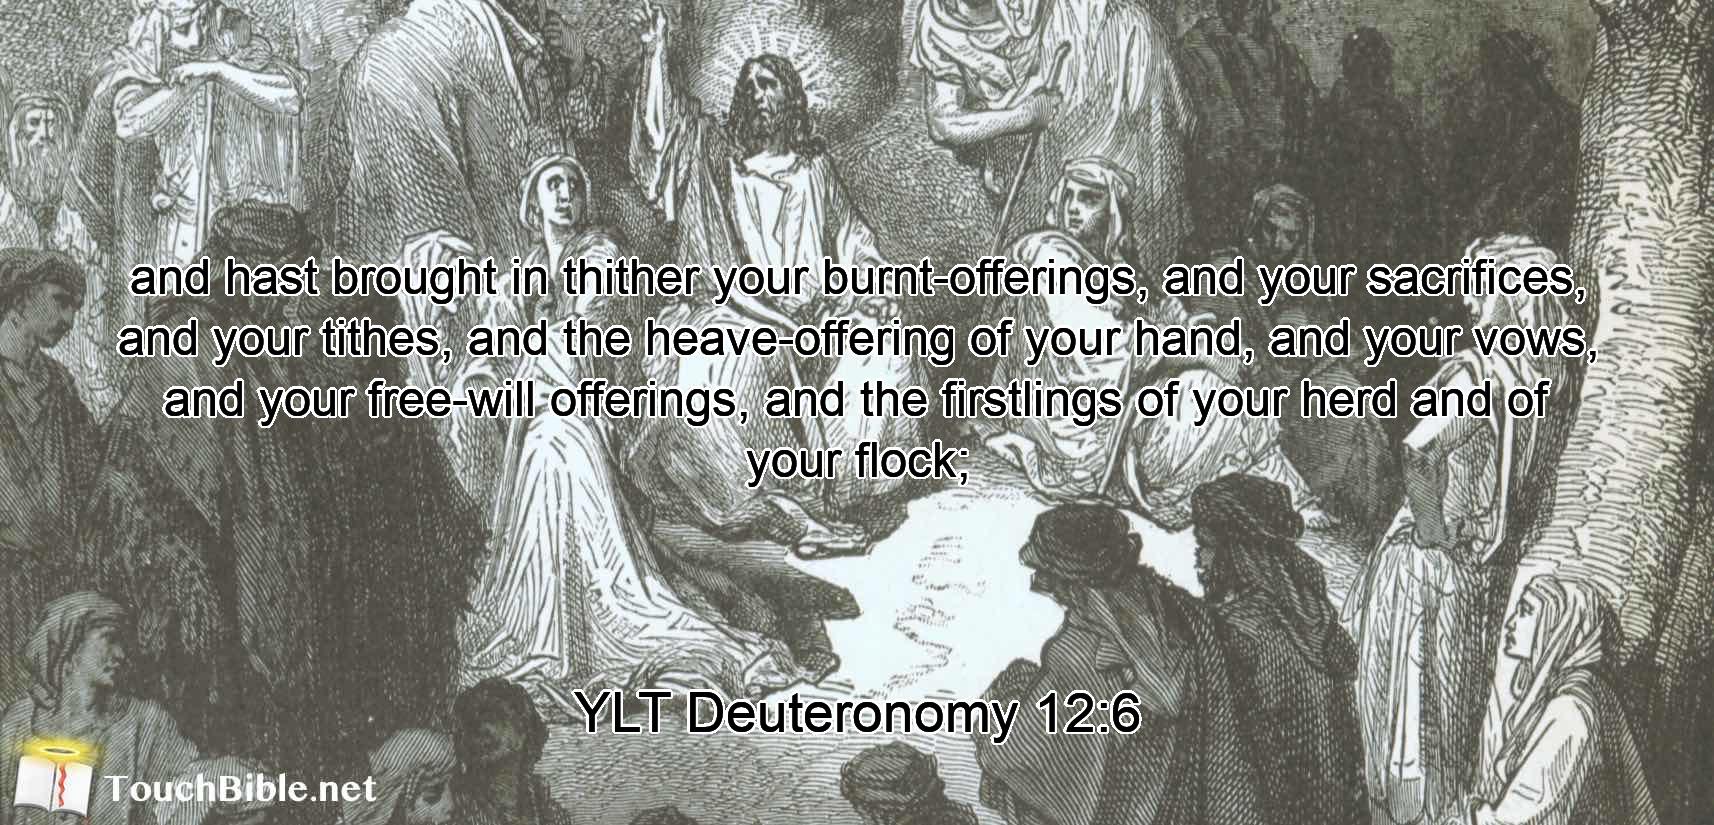 and hast brought in thither your burnt-offerings, and your sacrifices, and your tithes, and the heave-offering of your hand, and your vows, and your free-will offerings, and the firstlings of your herd and of your flock;